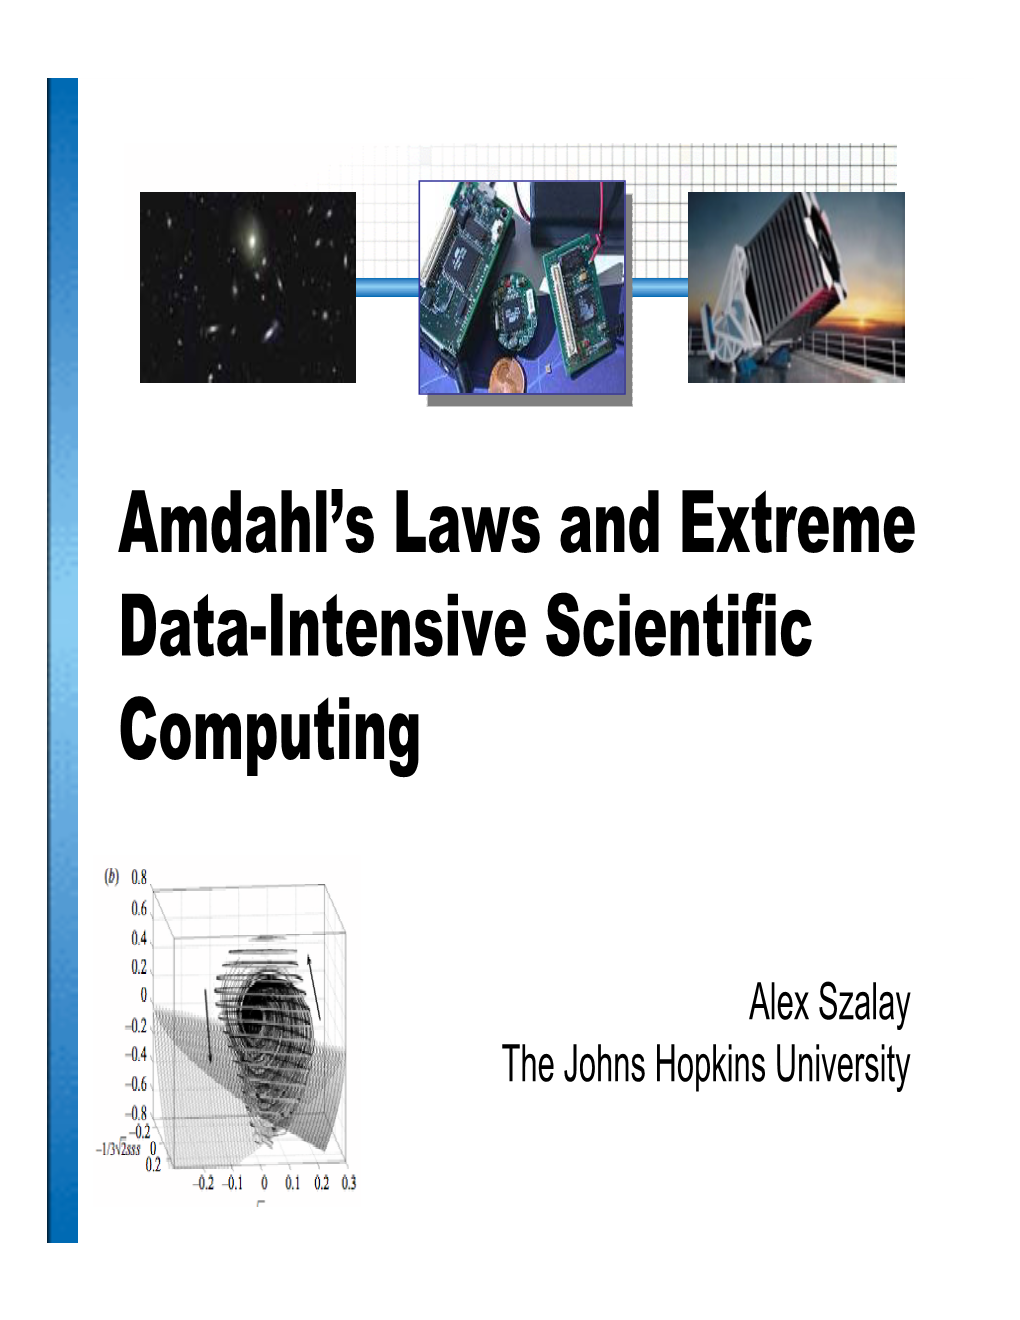 Amdahl's Laws and Extreme Data-Intensive Scientific Computing